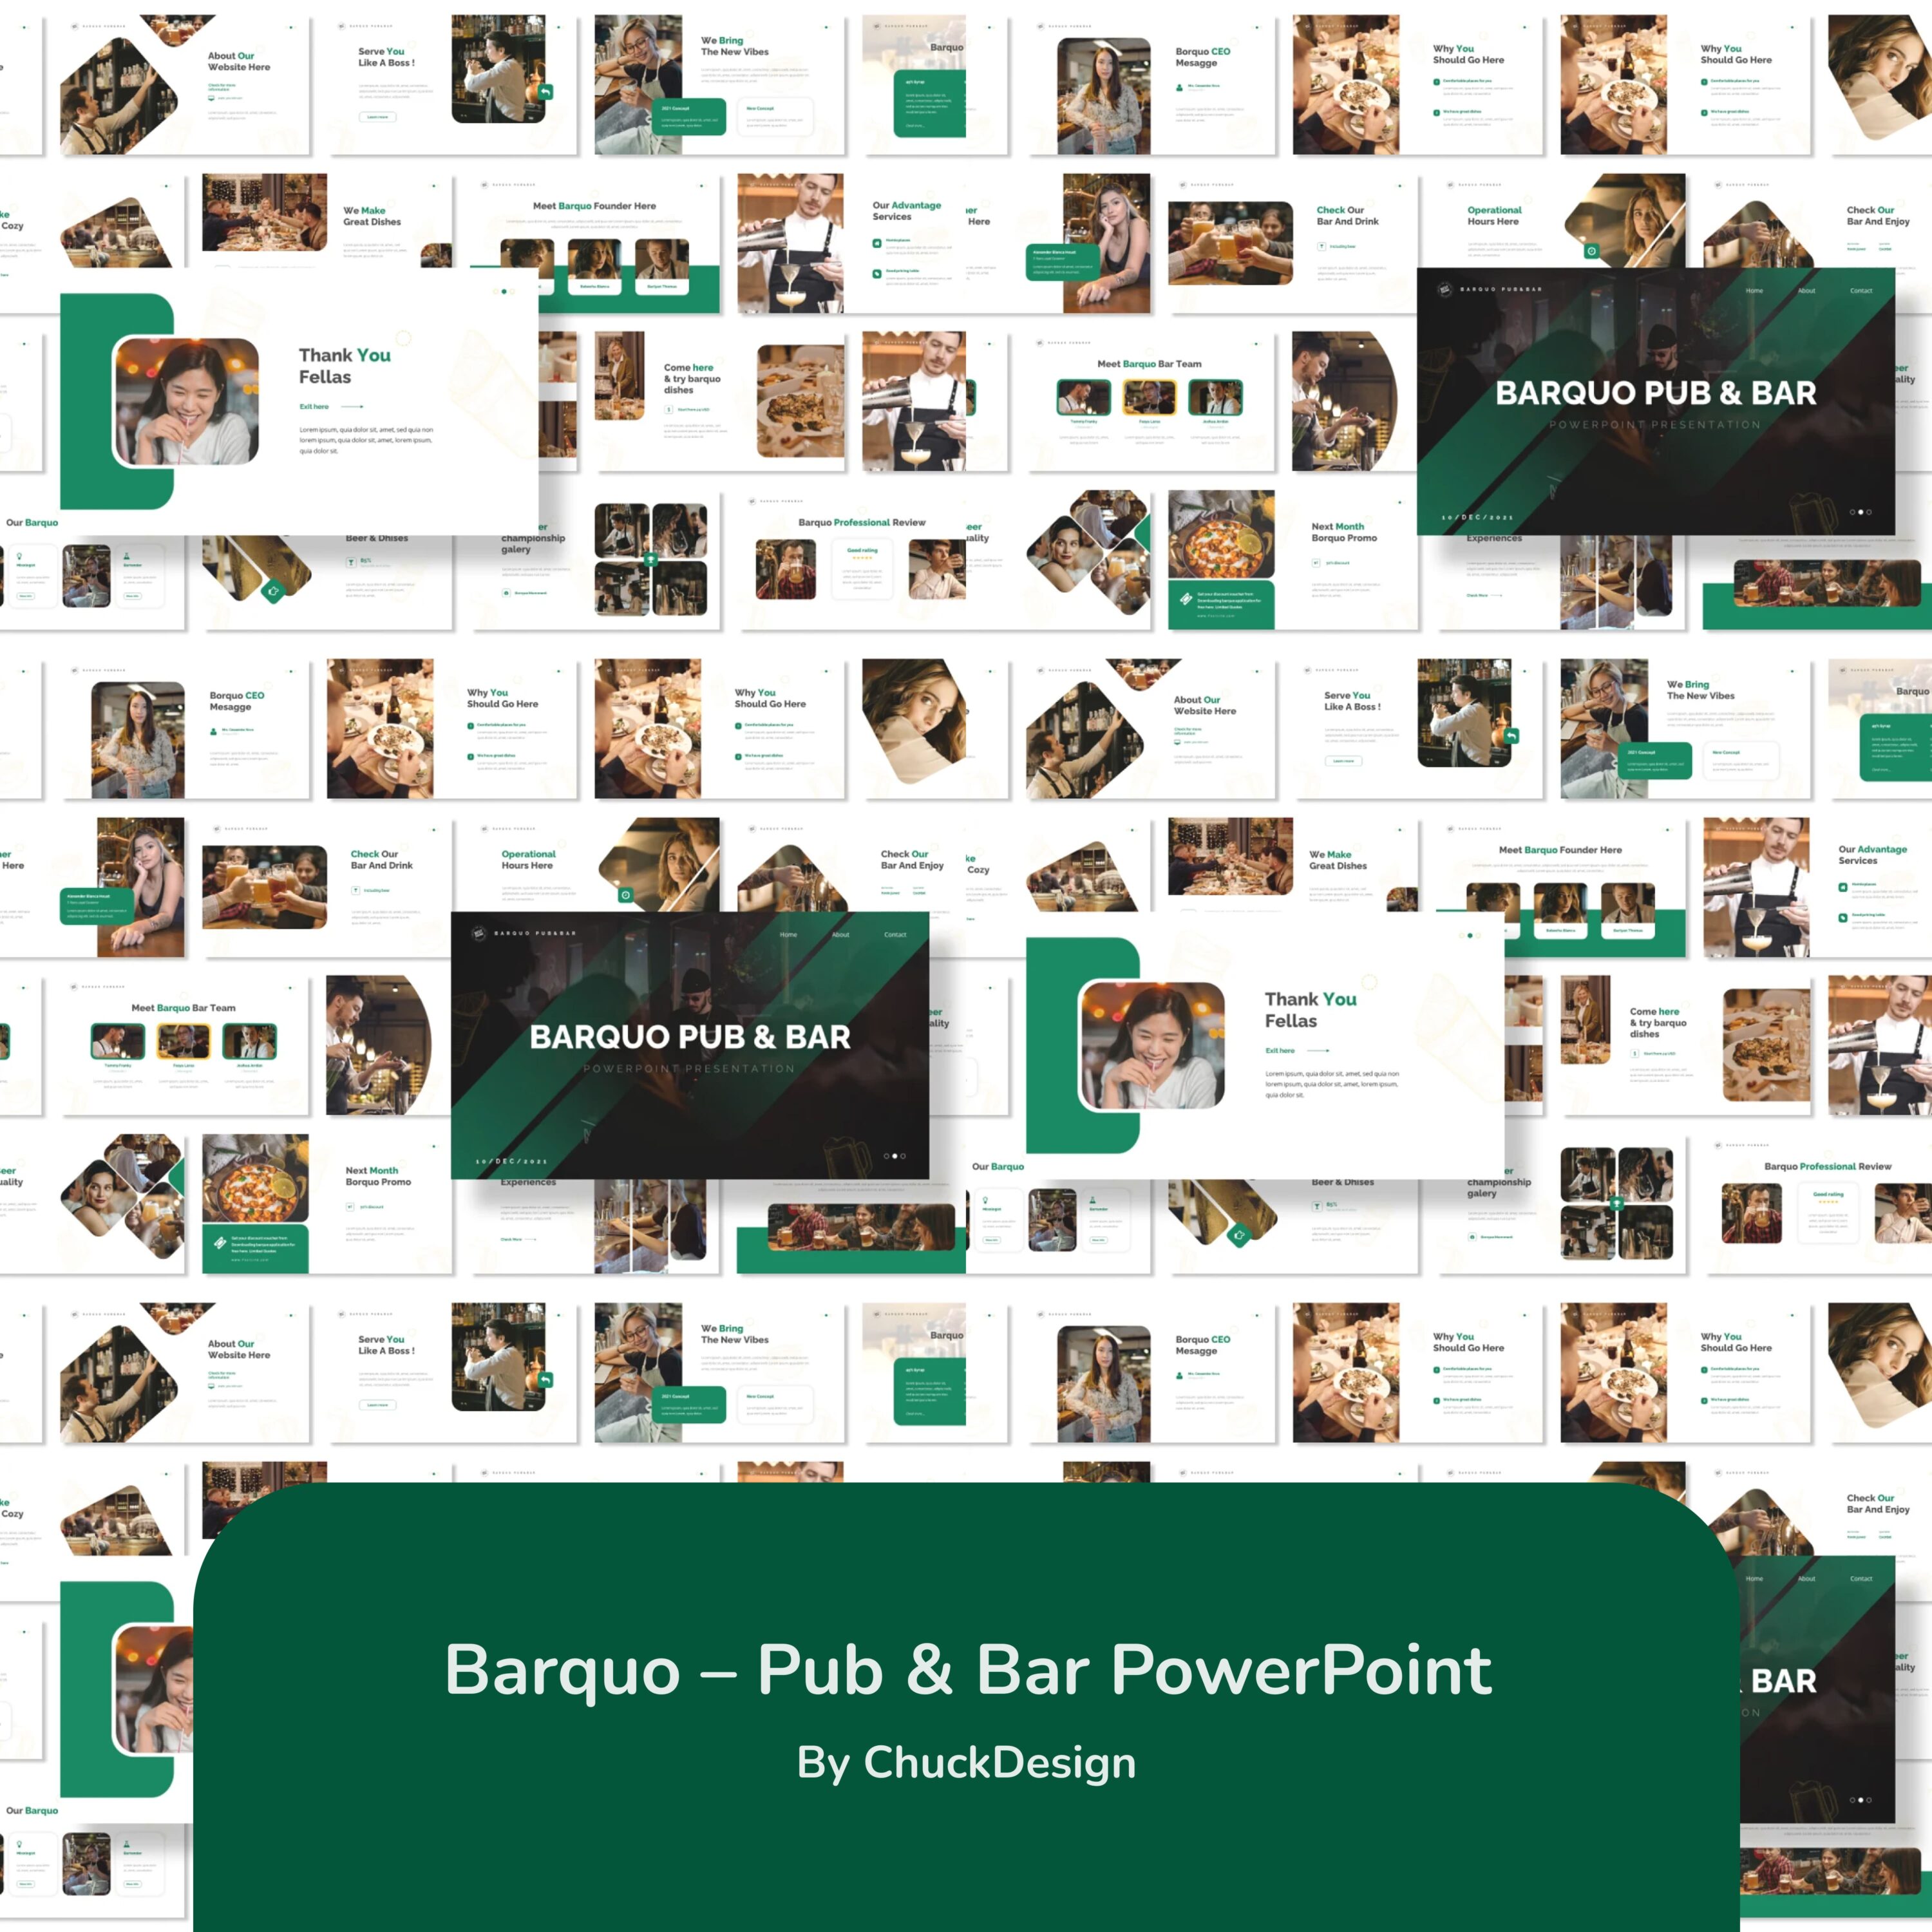 Barquo – Pub & Bar PowerPoint cover.